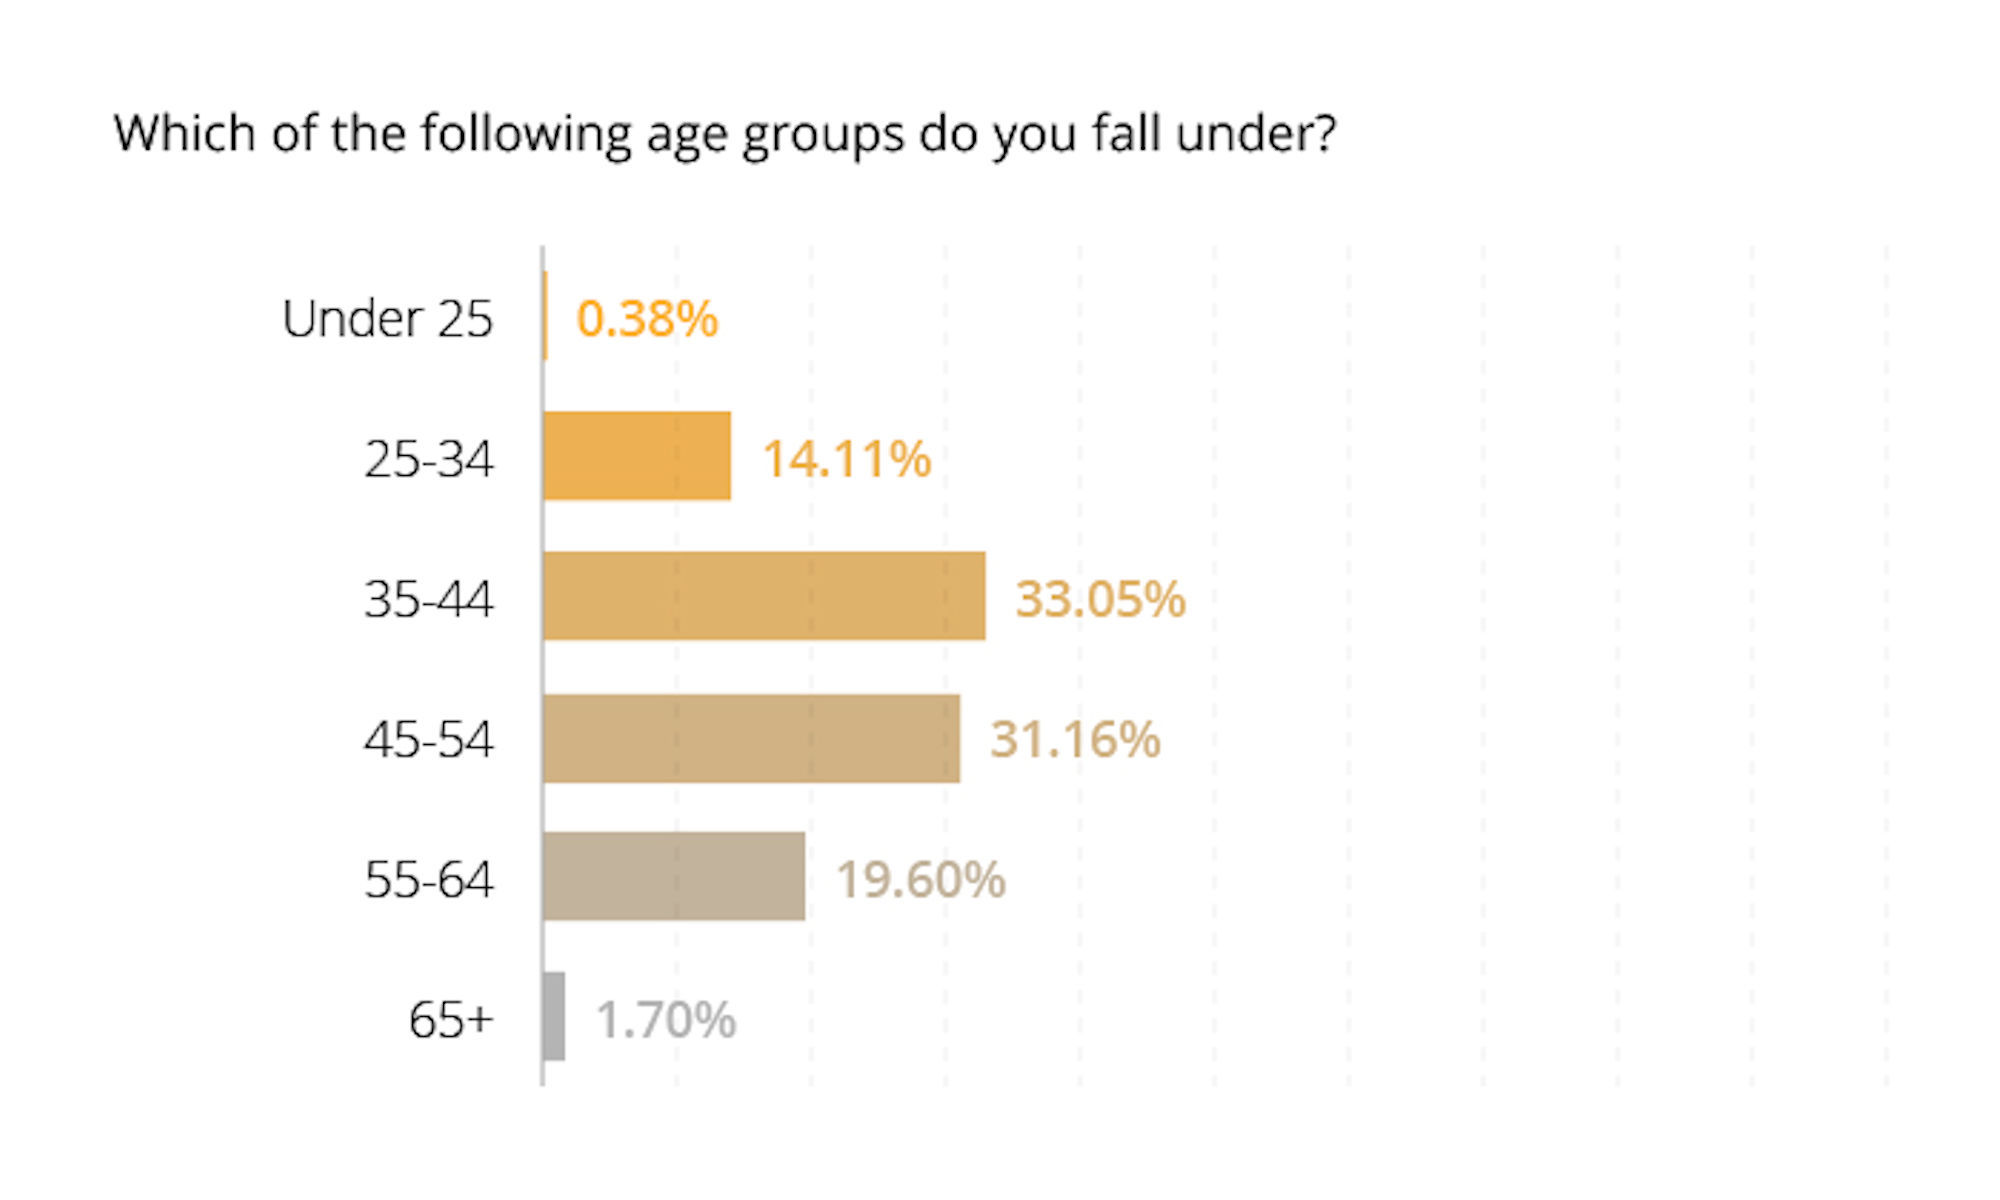 Which of the following age groups do you fall under?